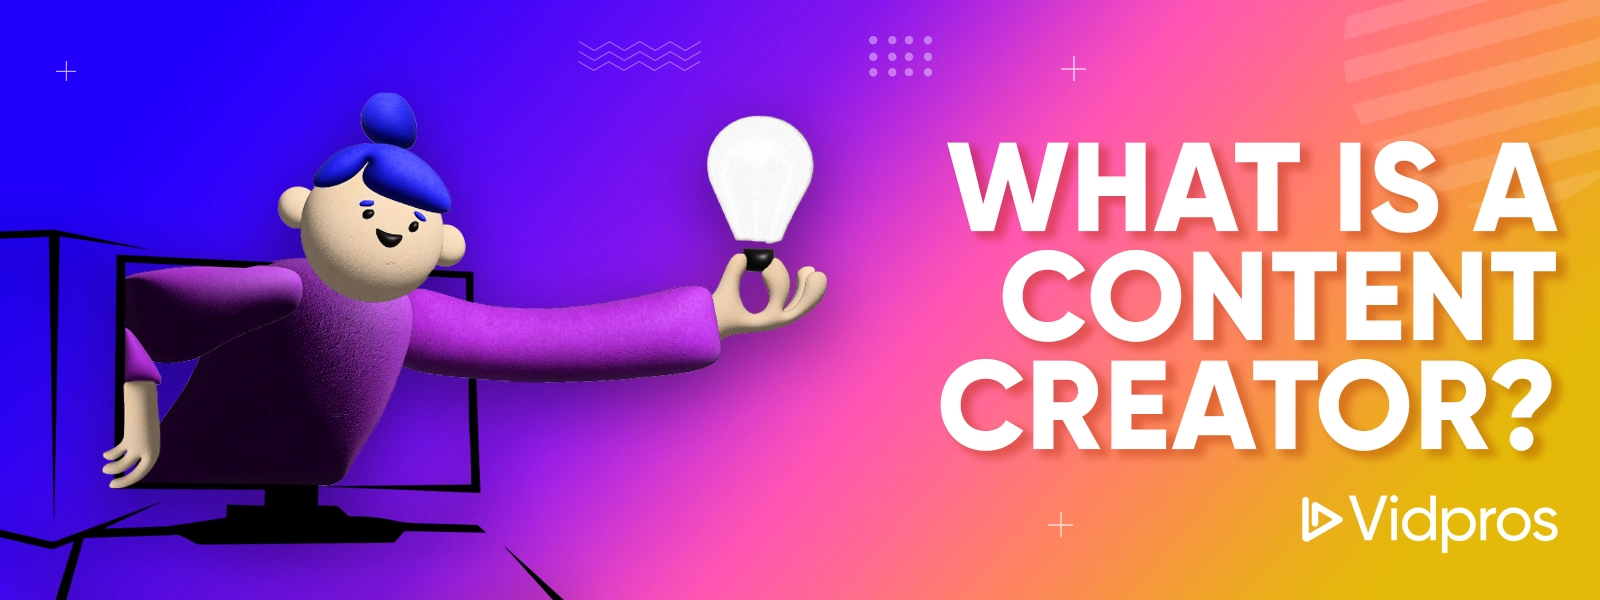 what is a content creator?